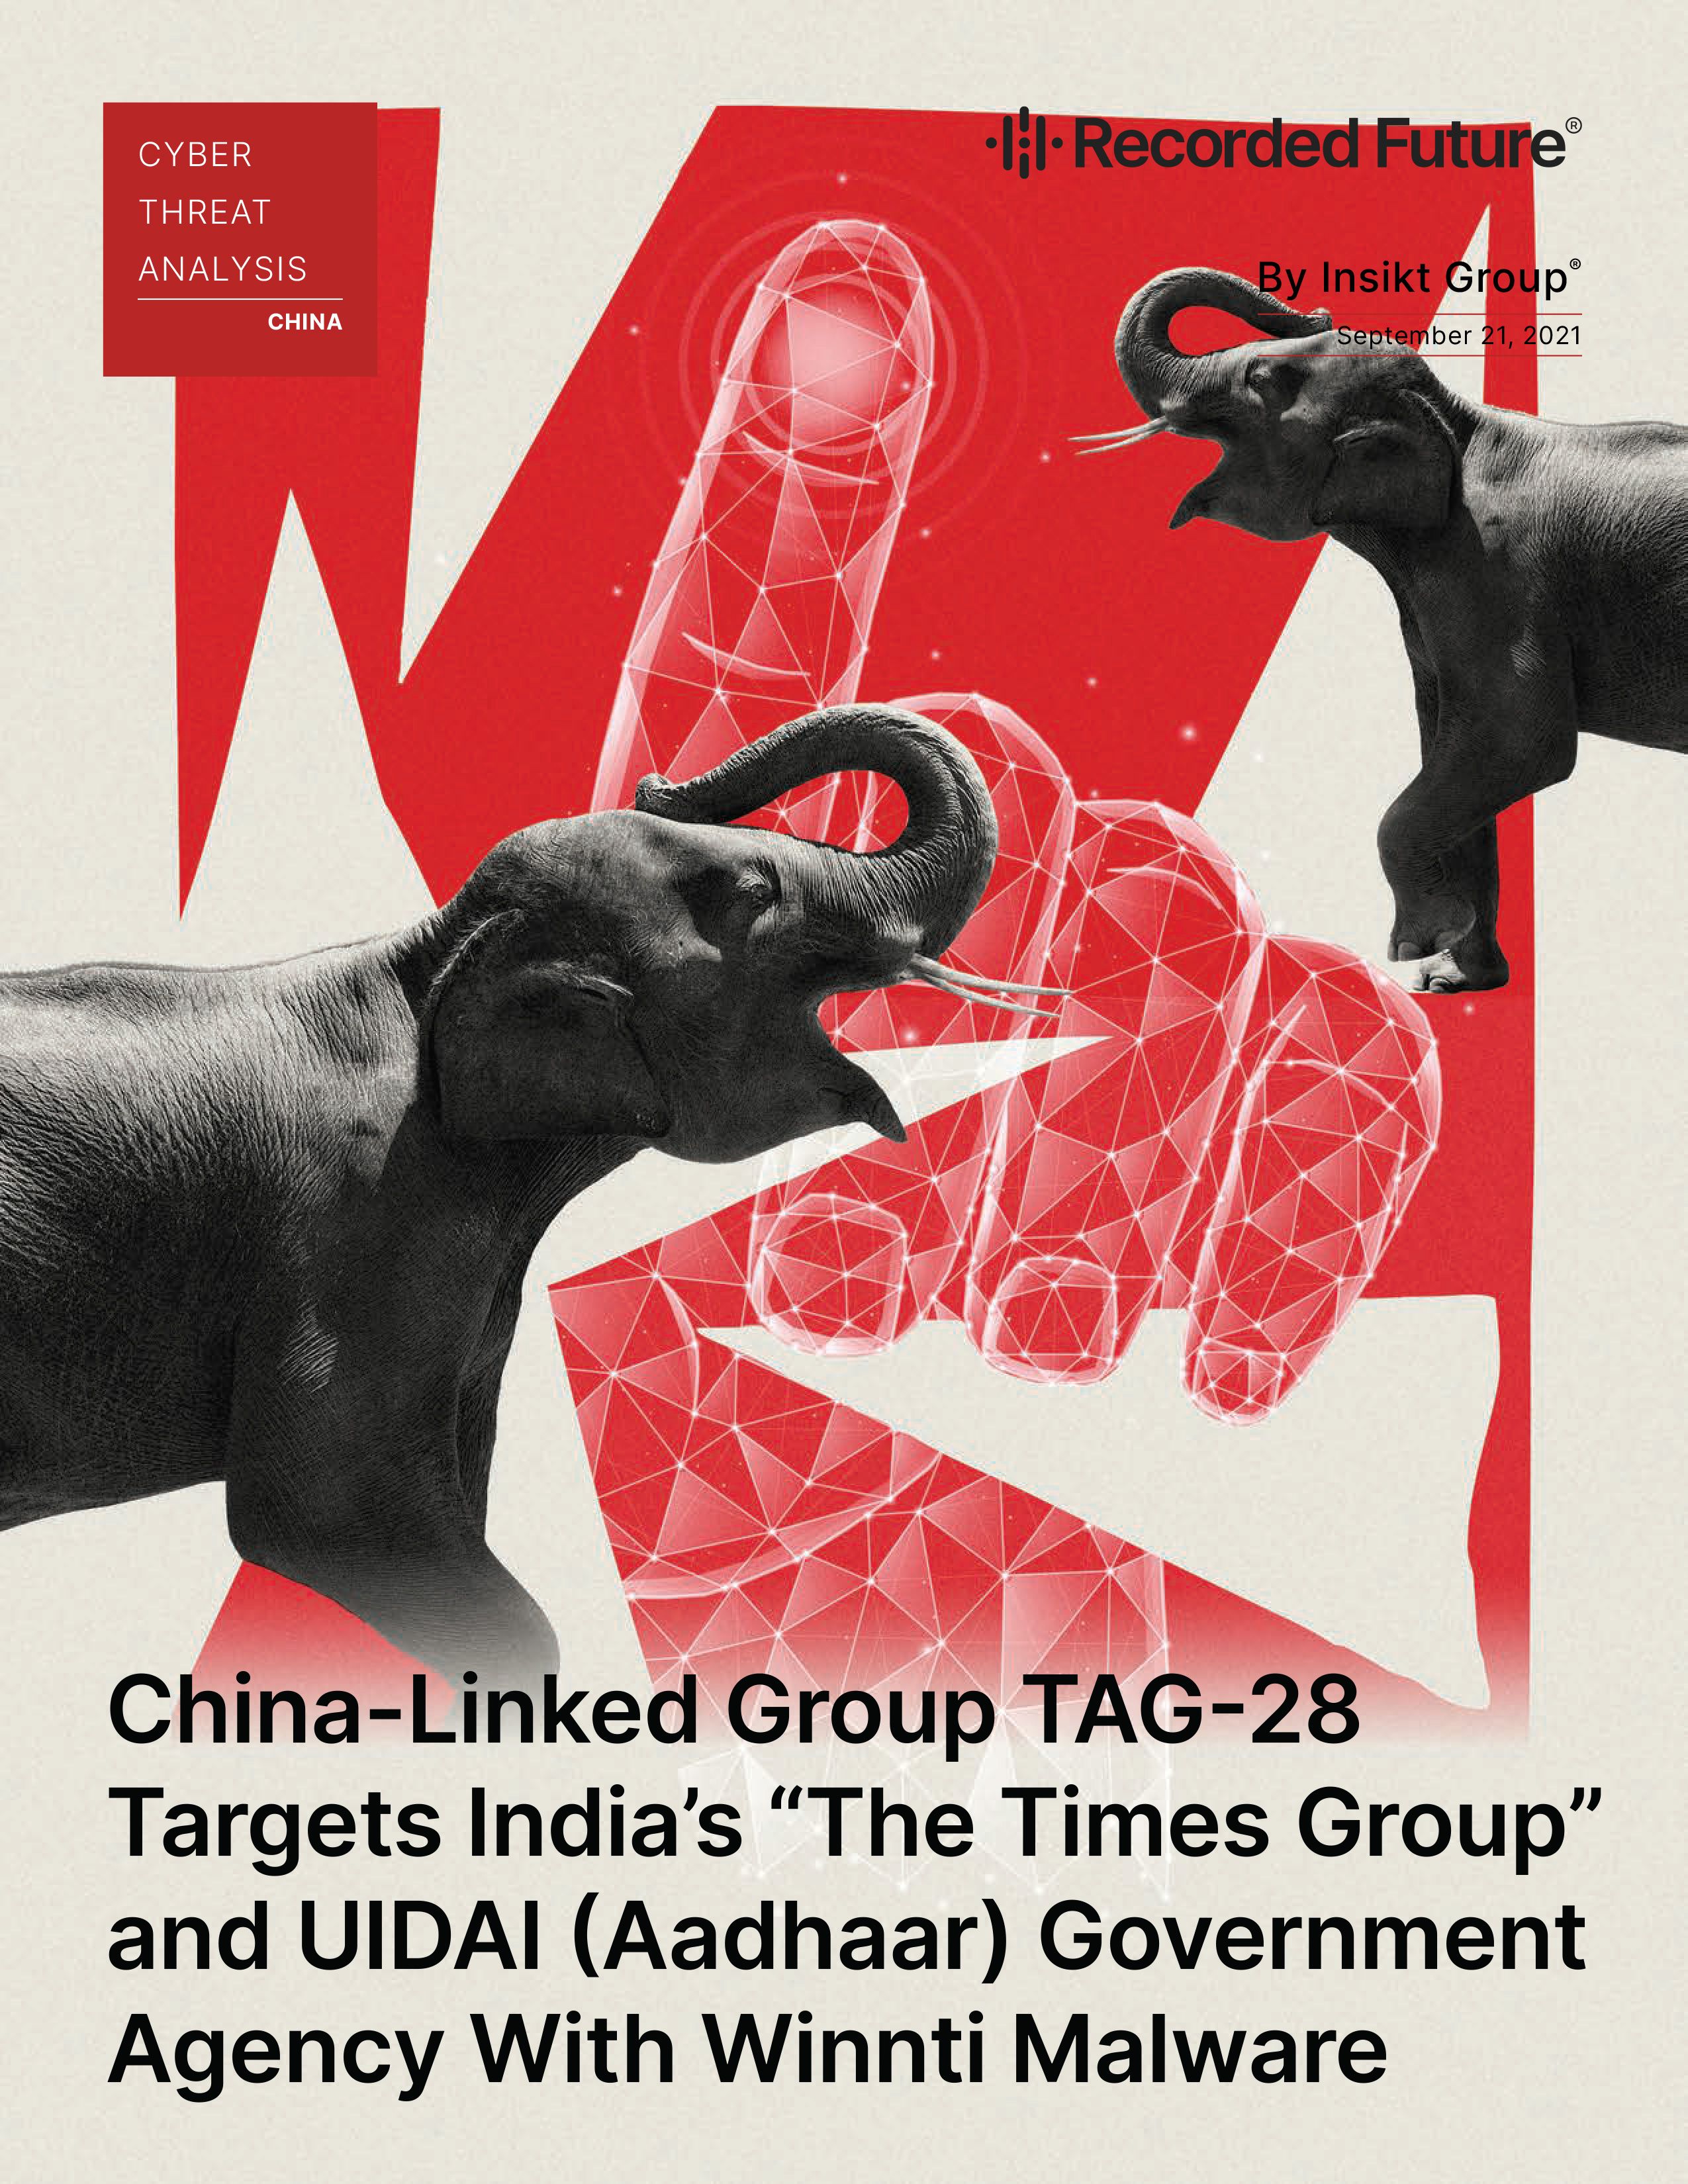 China-Linked Group TAG-28 Targets India’s “The Times Group” and UIDAI (Aadhaar) Government Agency With Winnti Malware